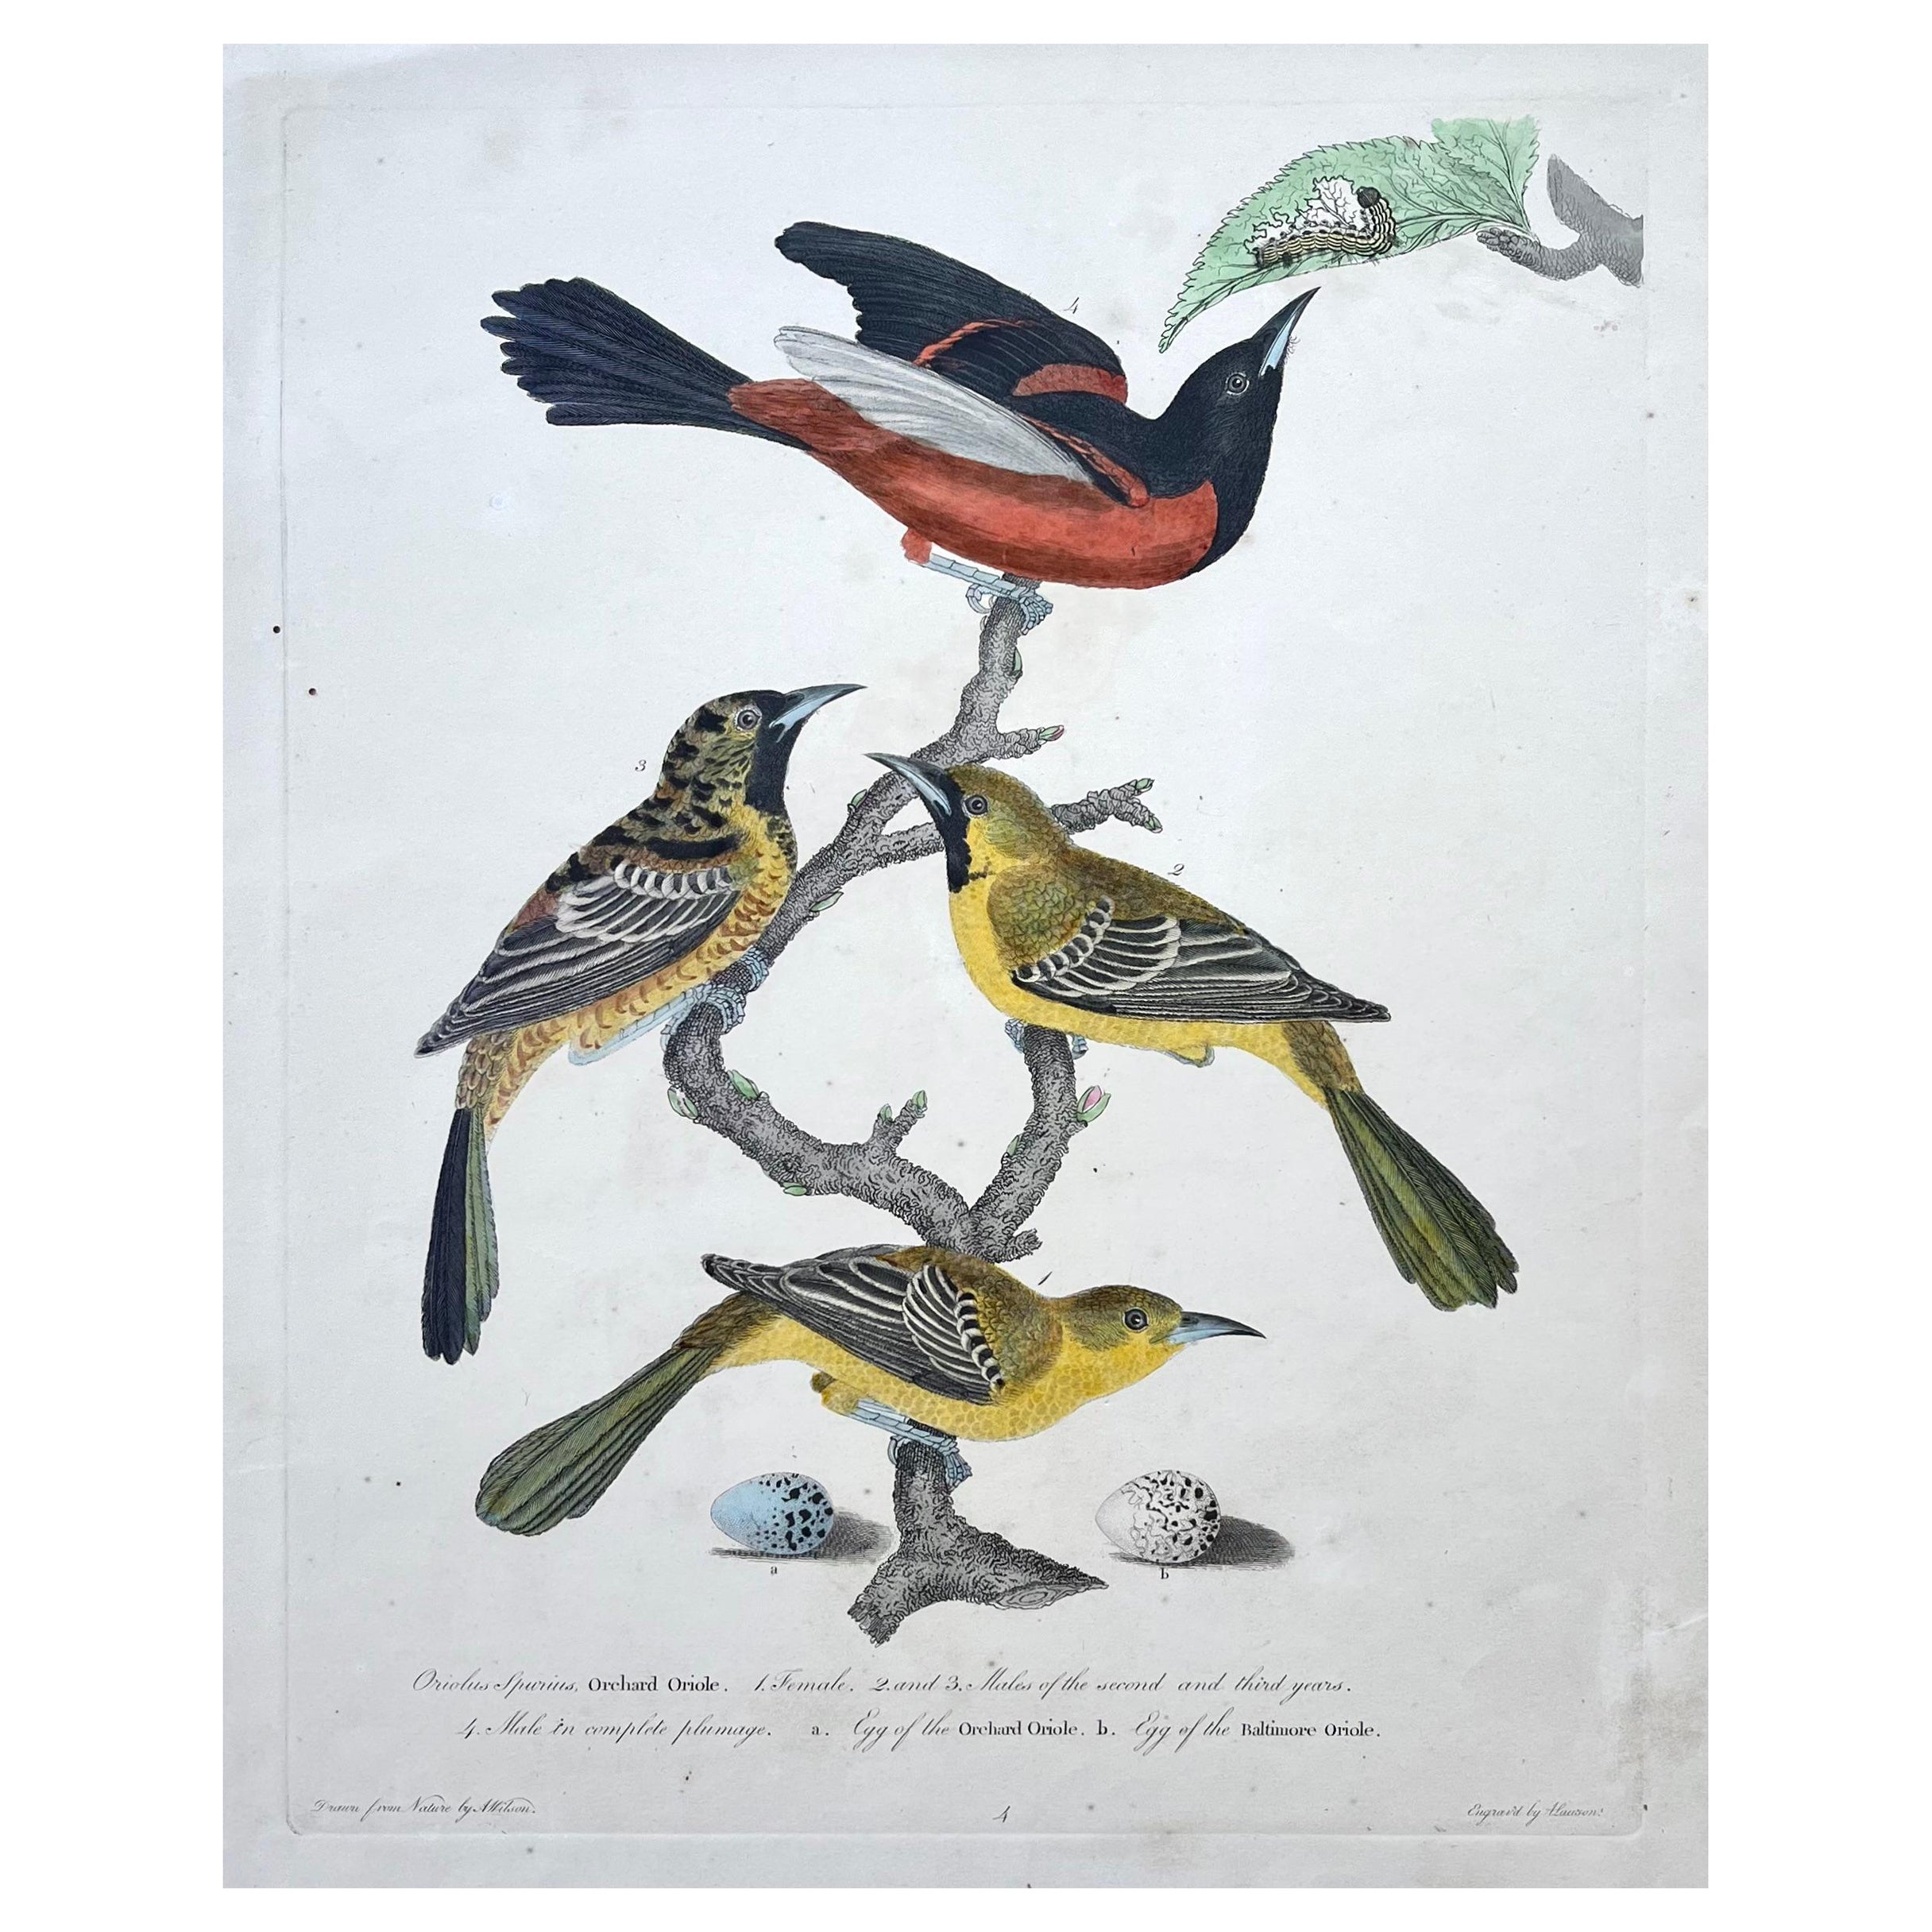 Early 19th Century Print of Orioles by Alexander Wilson of American Ornithology